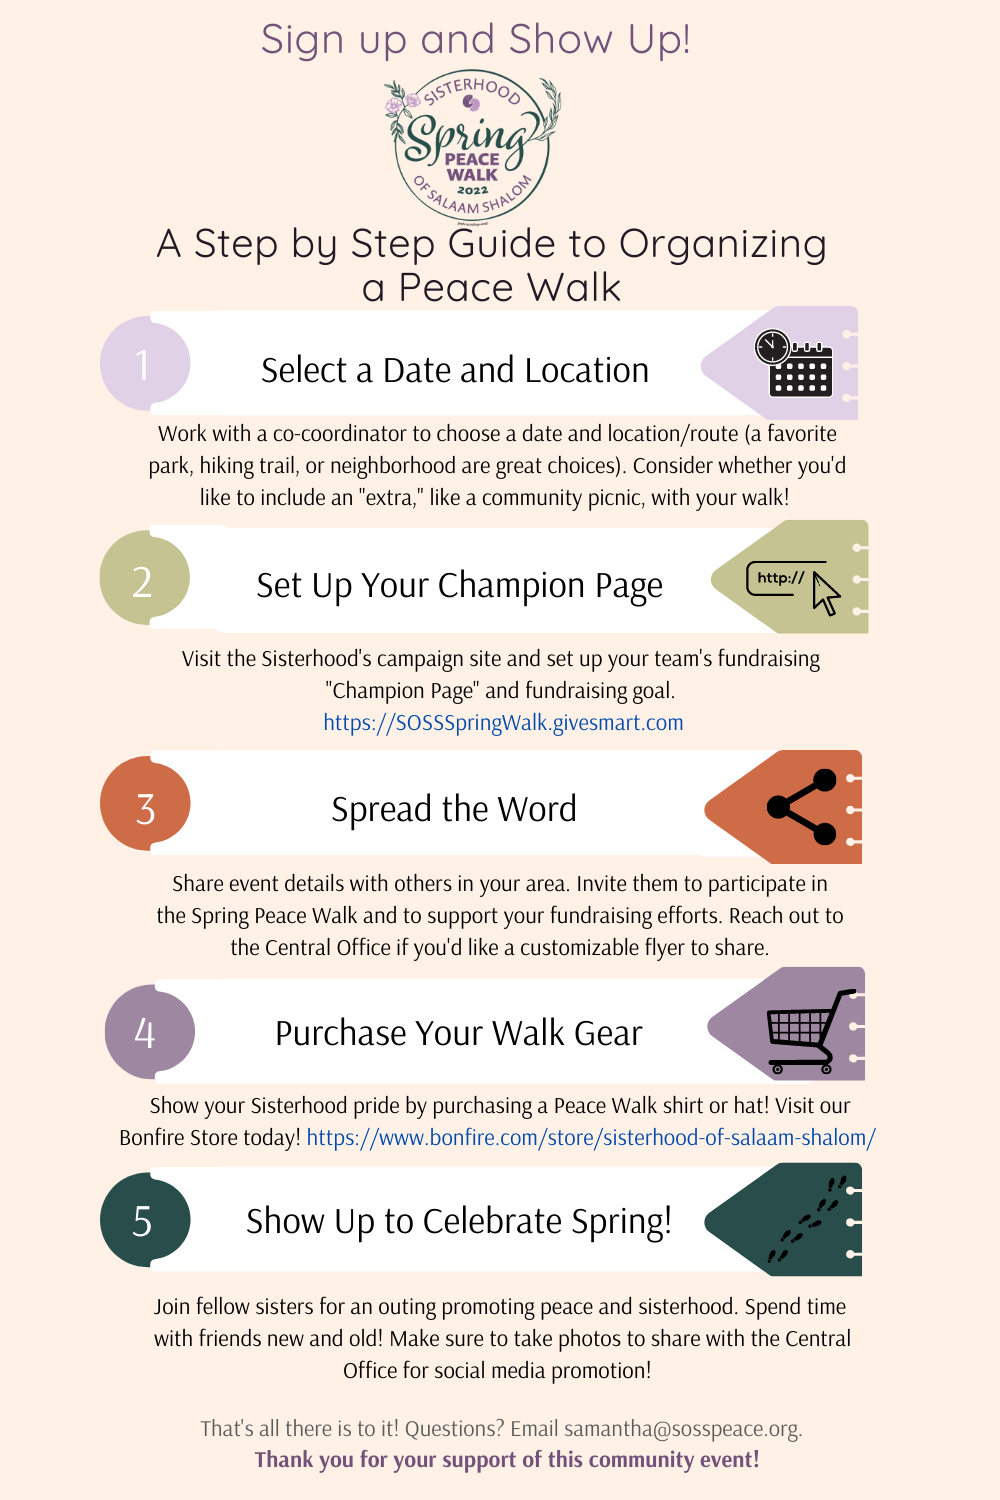 Sign Up and Show Up to Our Spring Peace Walk